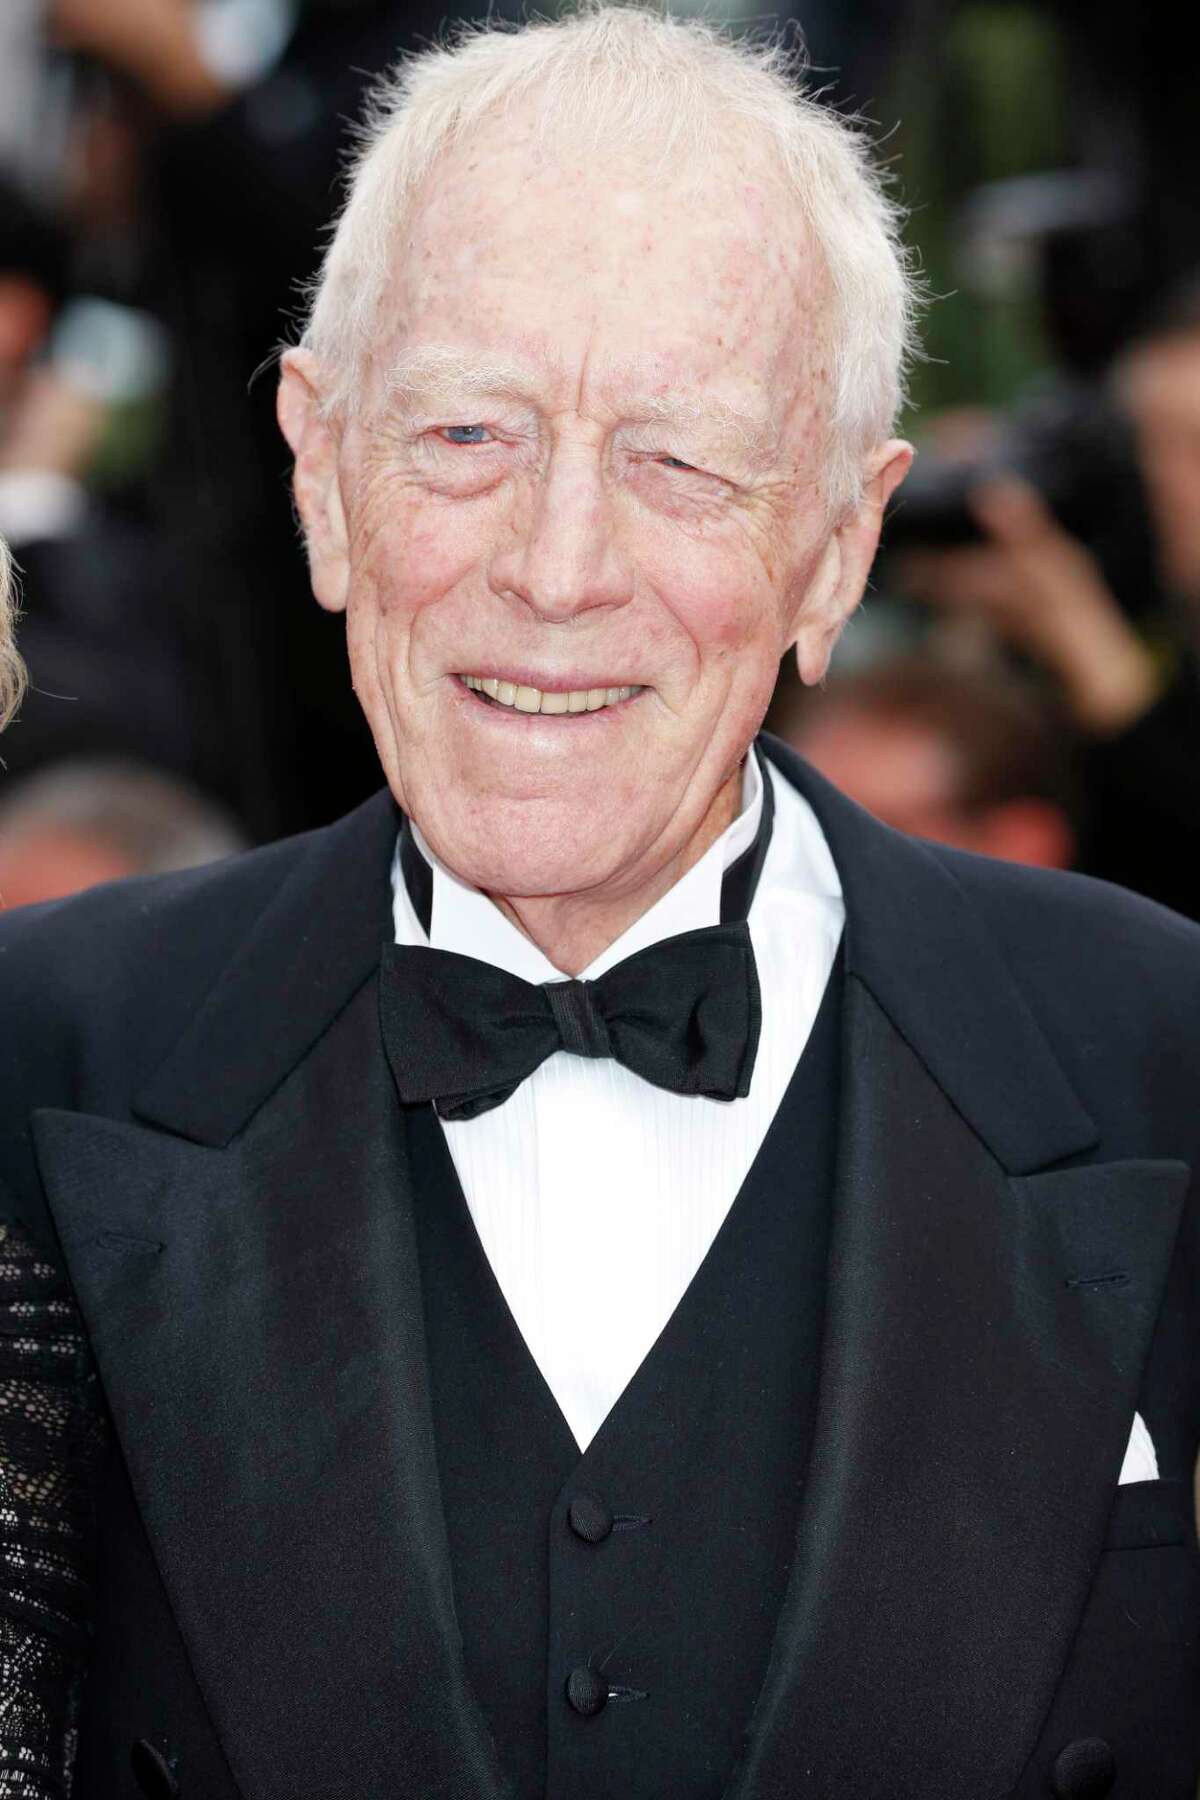 Max von Sydow at the “The BFG” premiere during the 69th Cannes Film Festival at the Palais des Festivals on May 14, 2016 in Cannes, France.